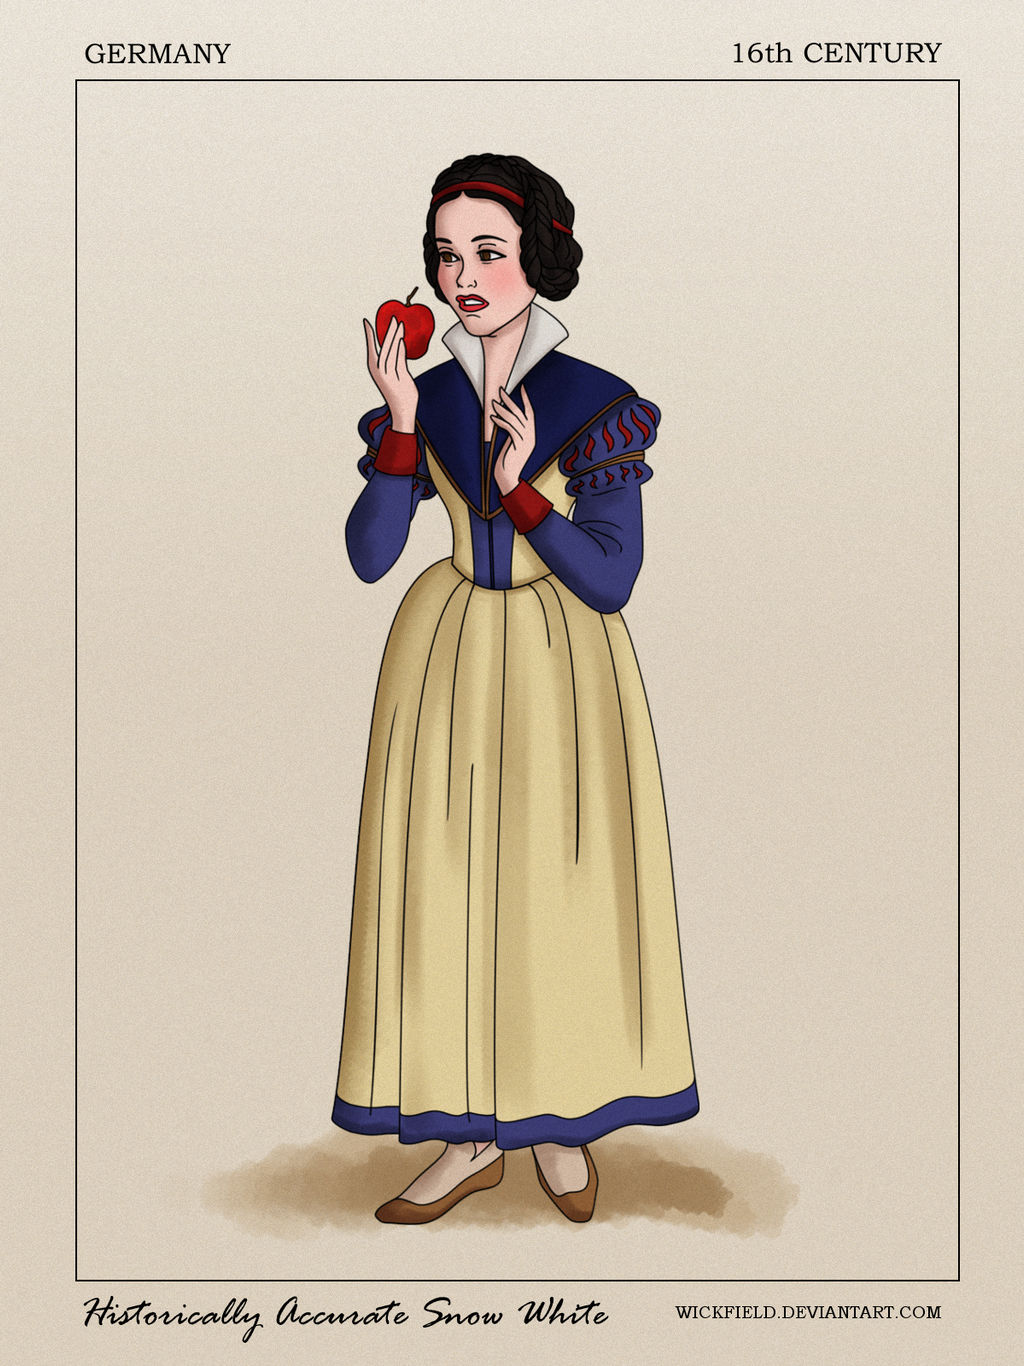 Historically Accurate Snow White